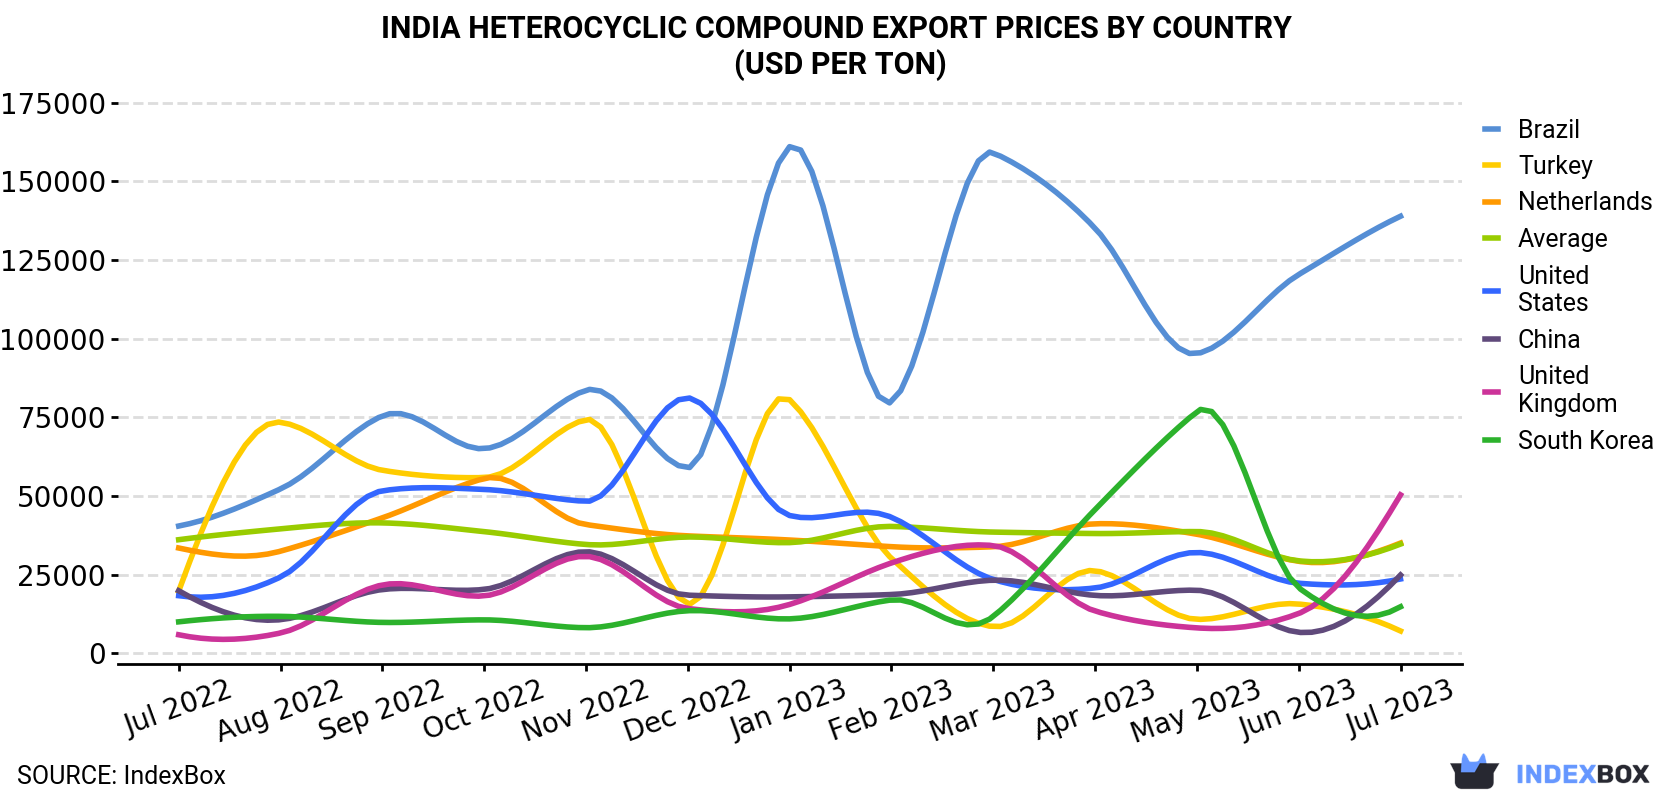 India Heterocyclic Compound Export Prices By Country (USD Per Ton)